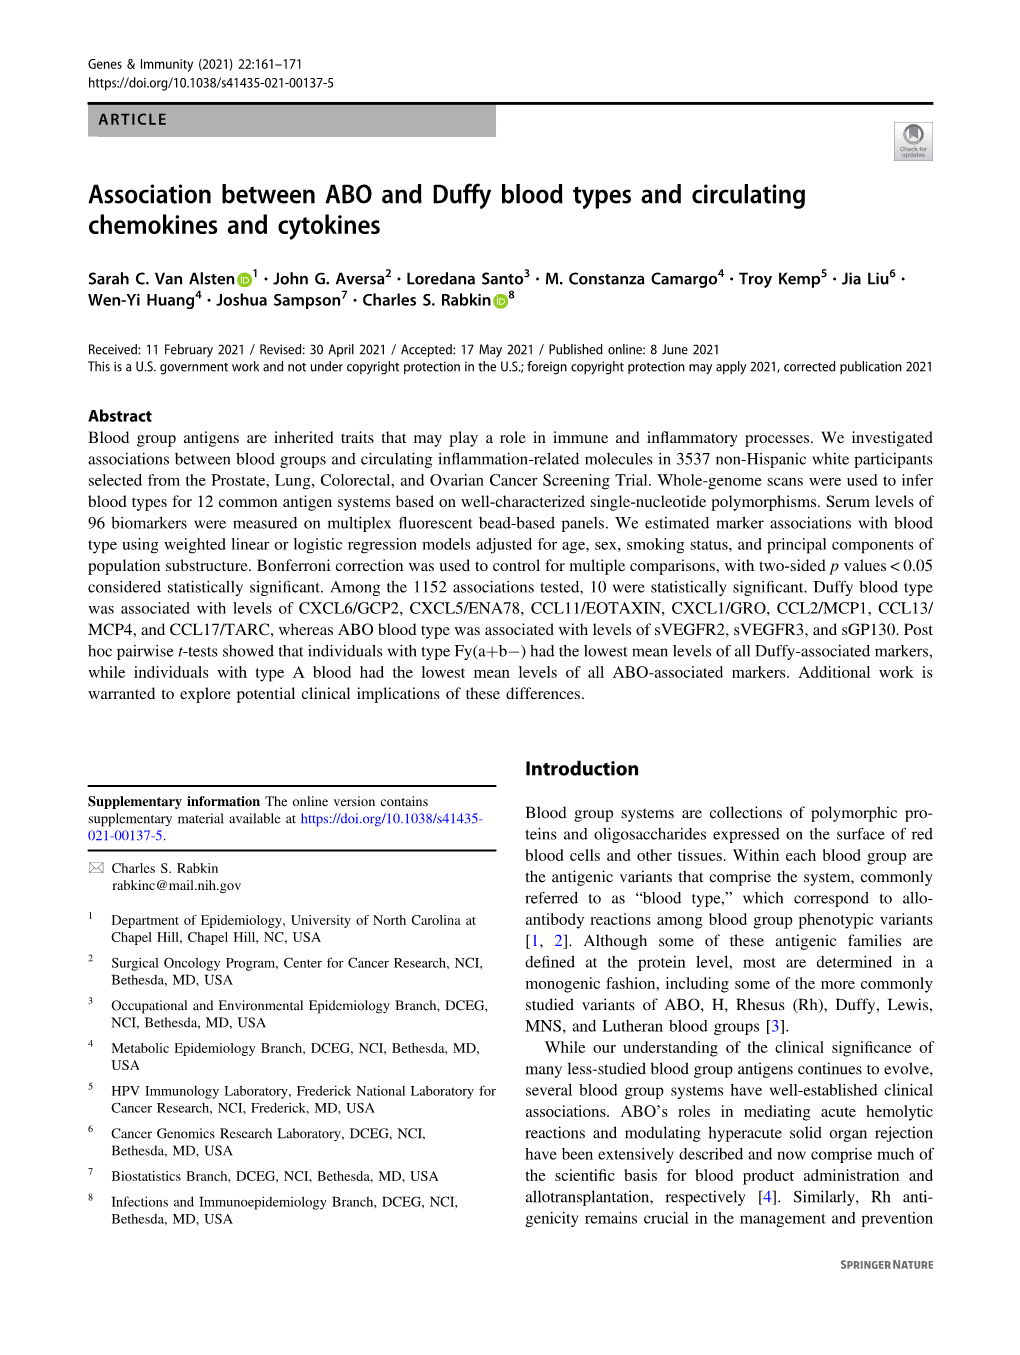 Association Between ABO and Duffy Blood Types and Circulating Chemokines and Cytokines